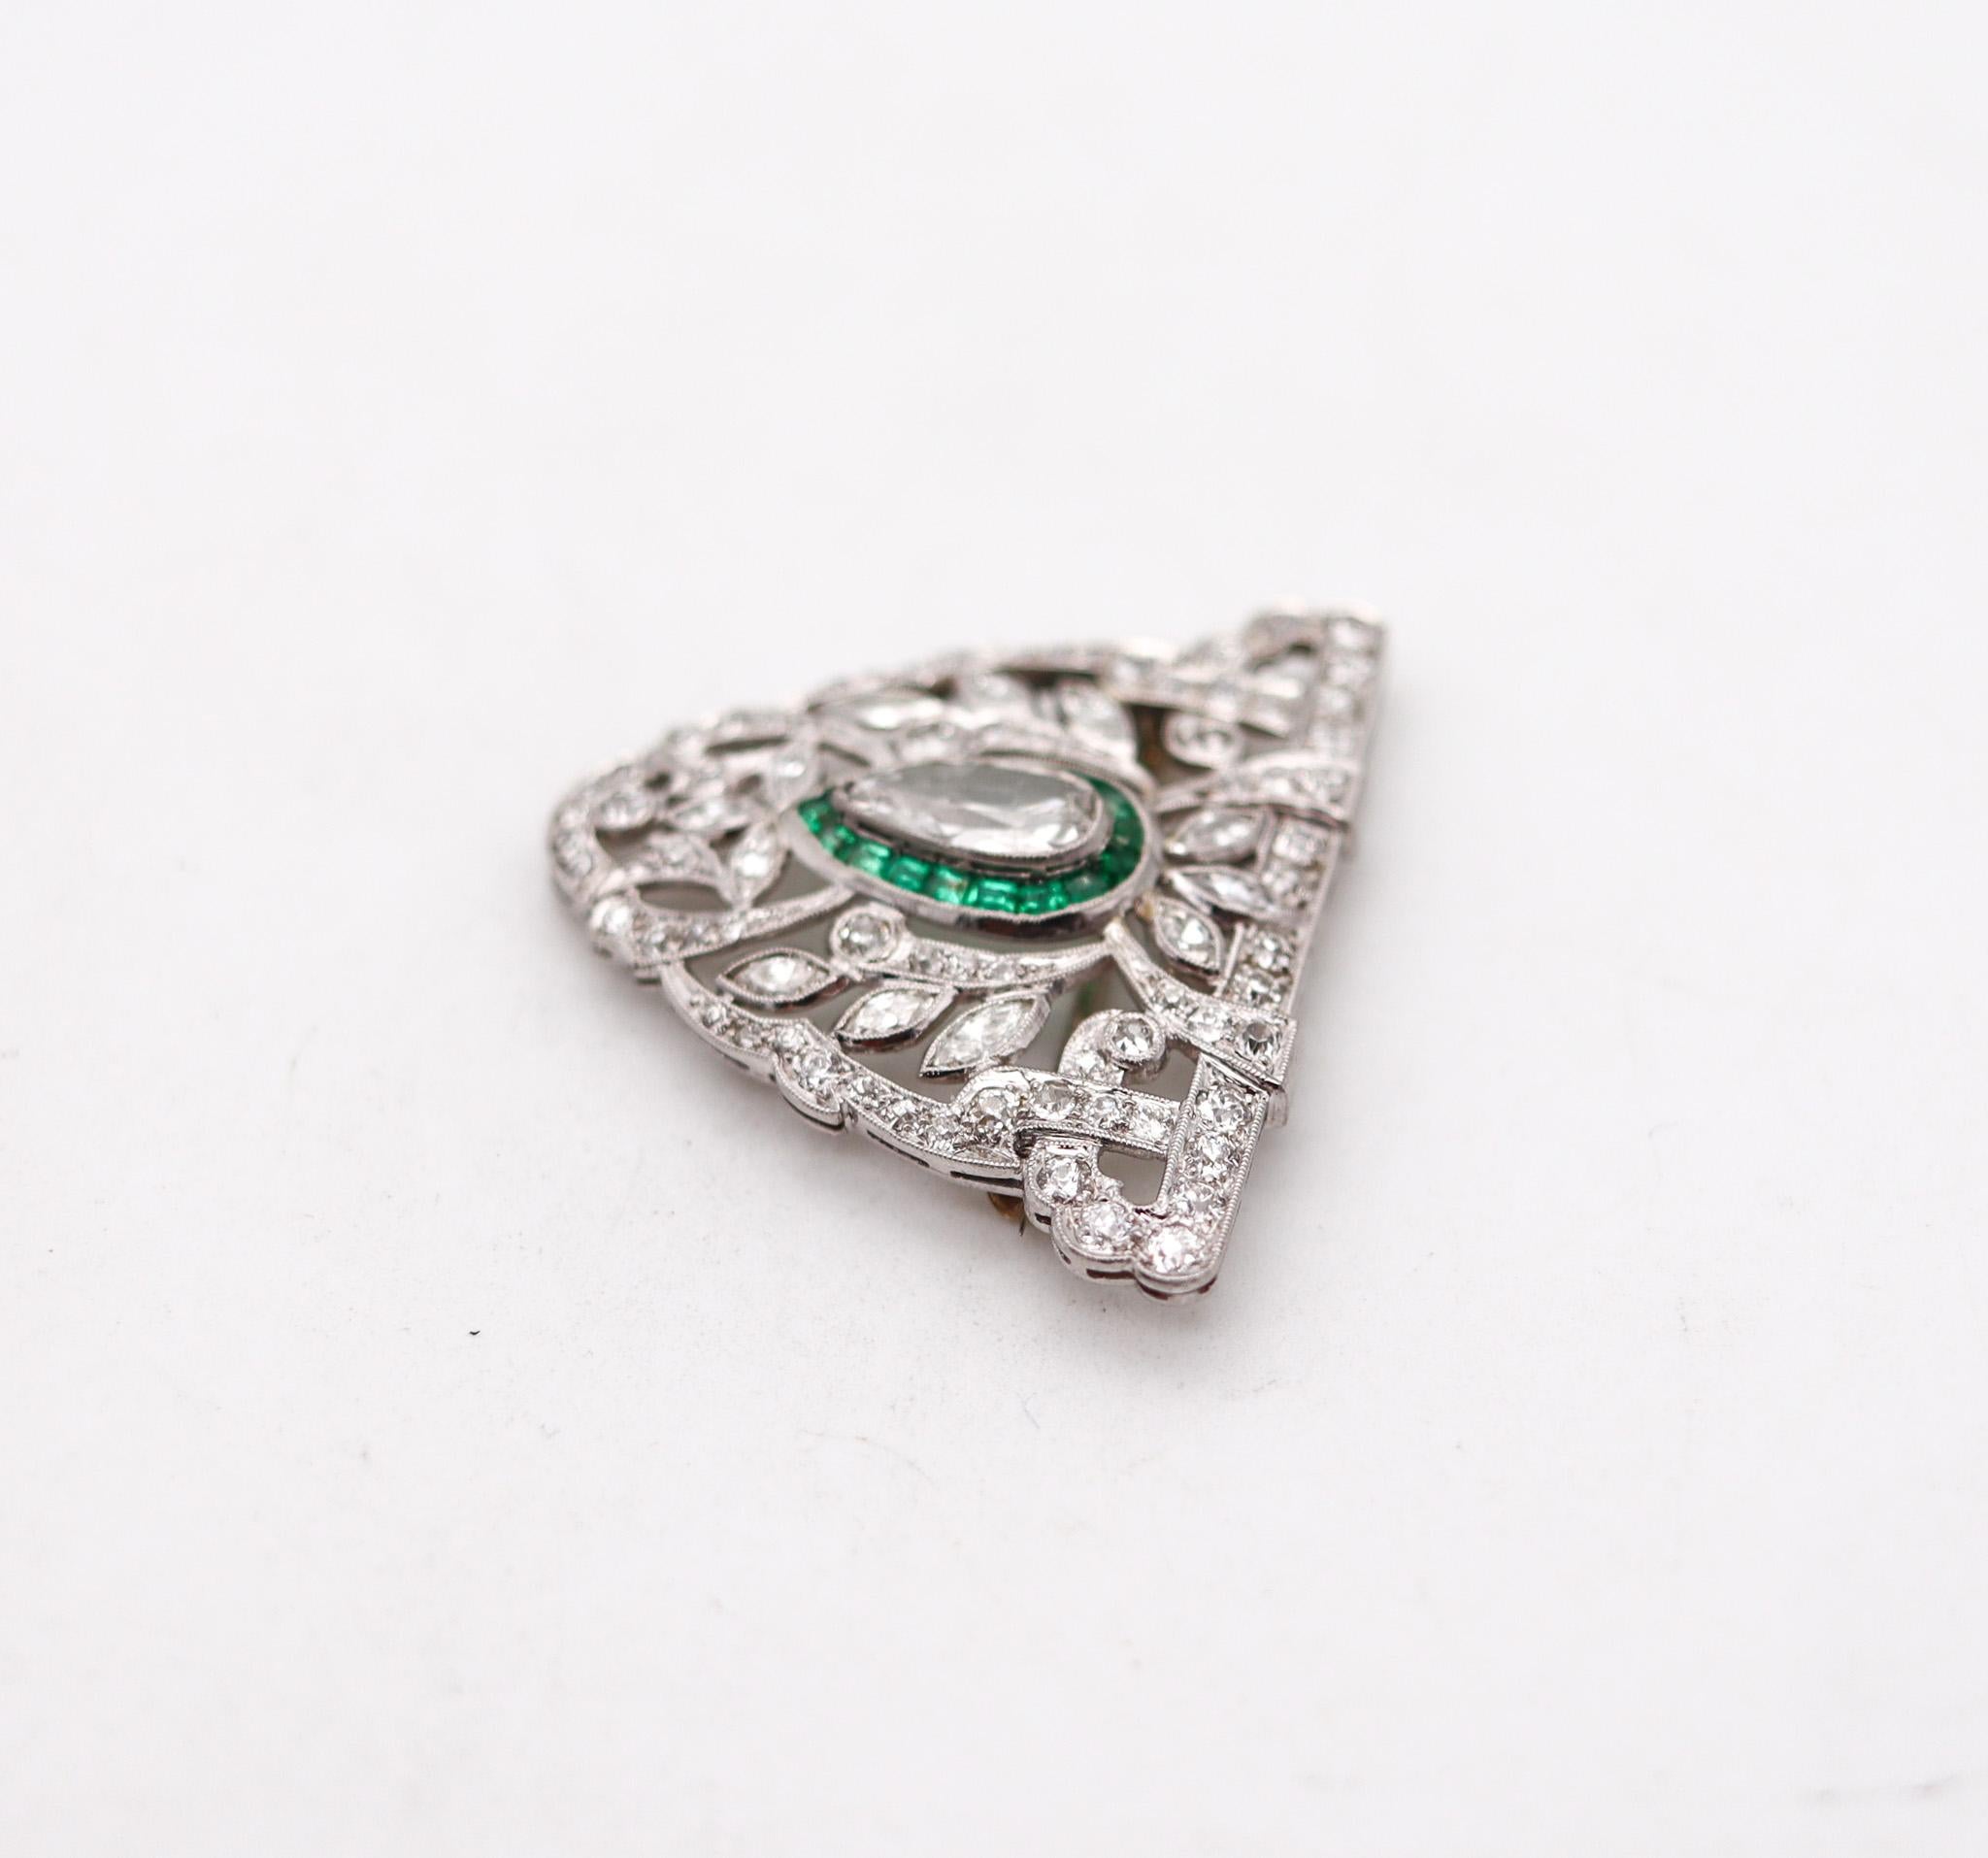 Brilliant Cut Art Deco 1930 Pendant Brooch In Platinum With 5.01 Ctw In Diamonds And Emeralds For Sale